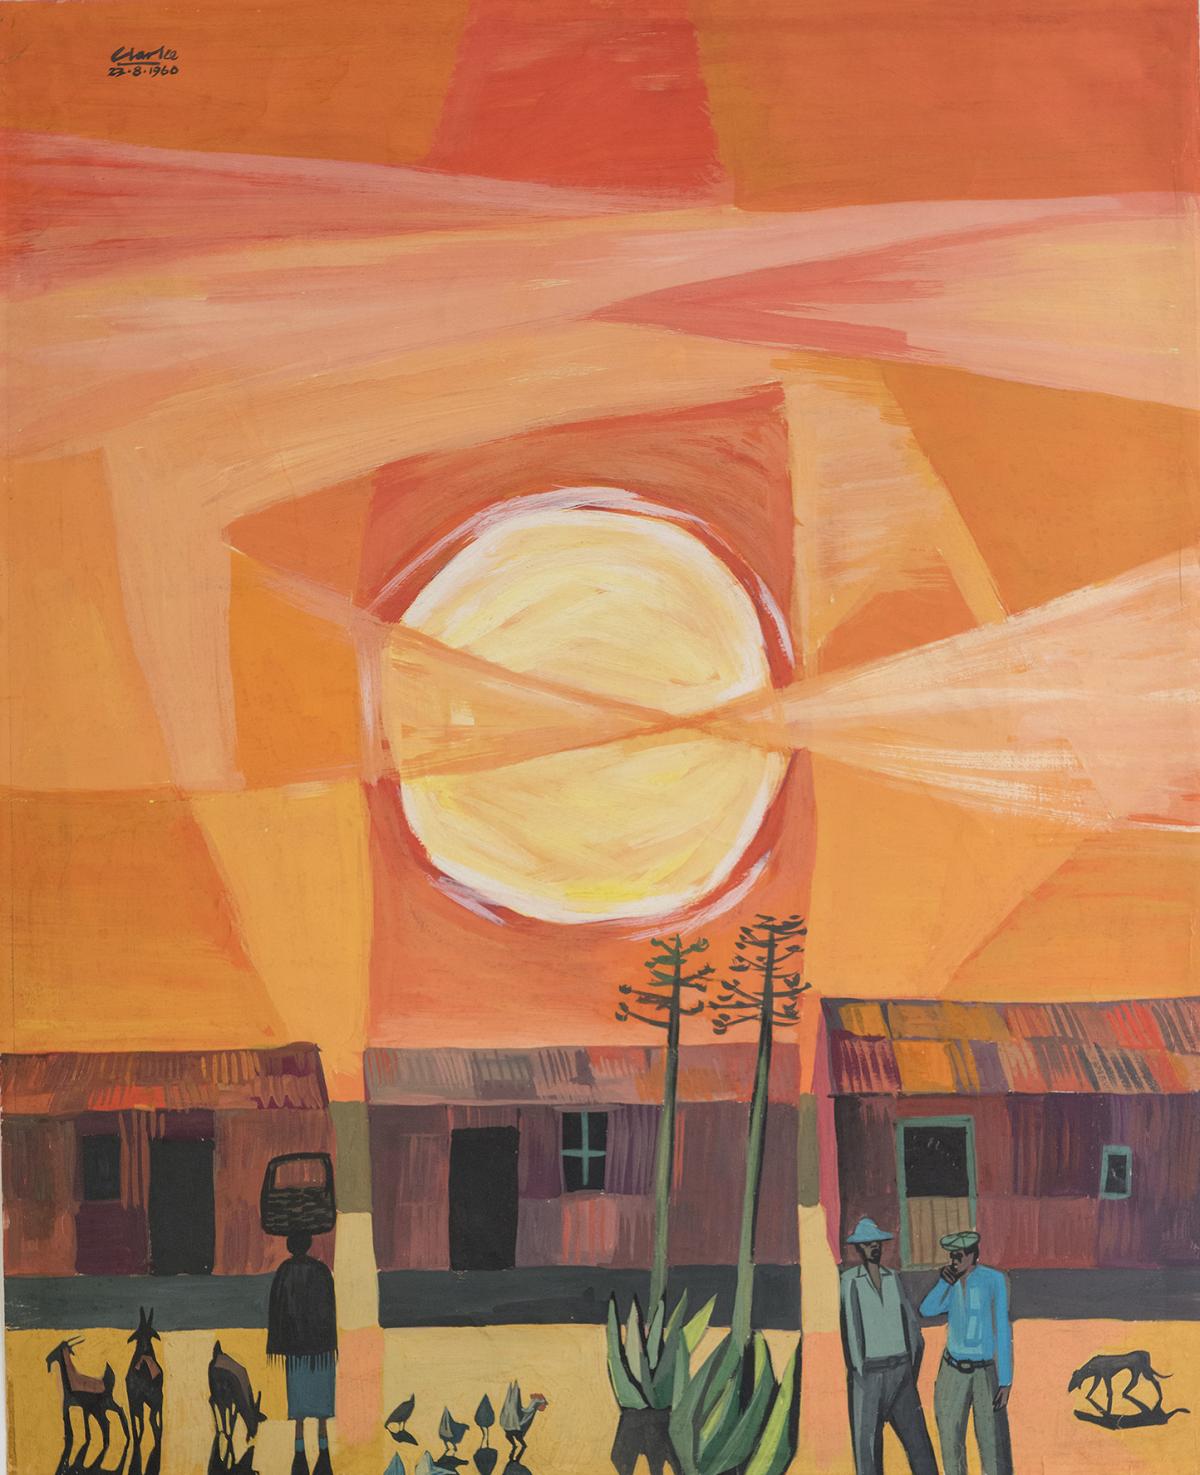 Abstract painting of large sun over small village